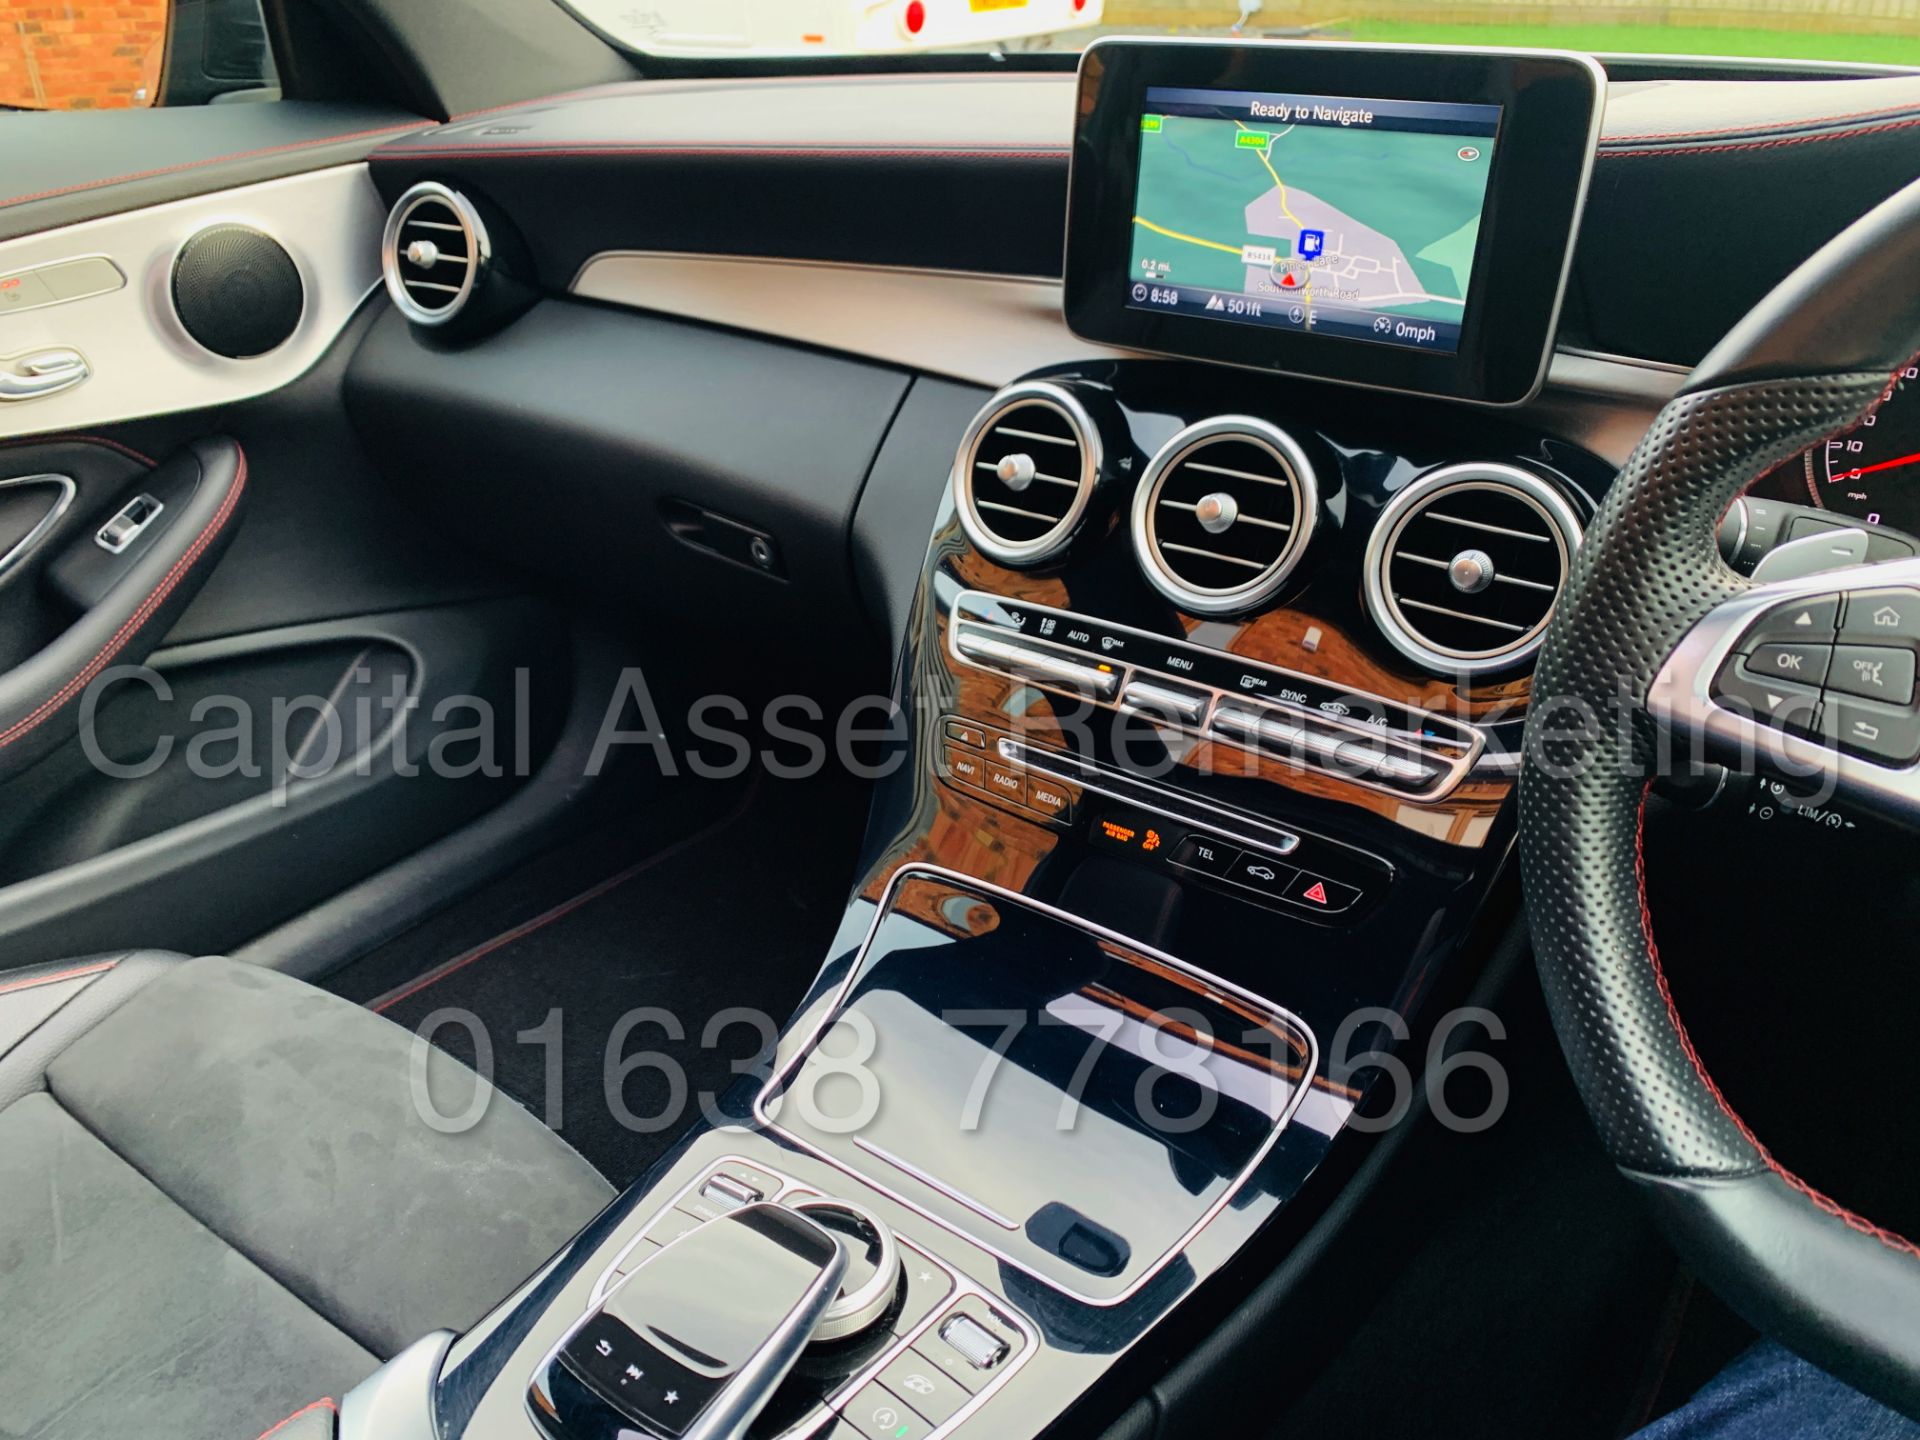 MERCEDES-BENZ C43 AMG *PREMIUM 4 MATIC* COUPE (2017) '9-G AUTO - LEATHER - SAT NAV' **FULLY LOADED** - Image 37 of 46